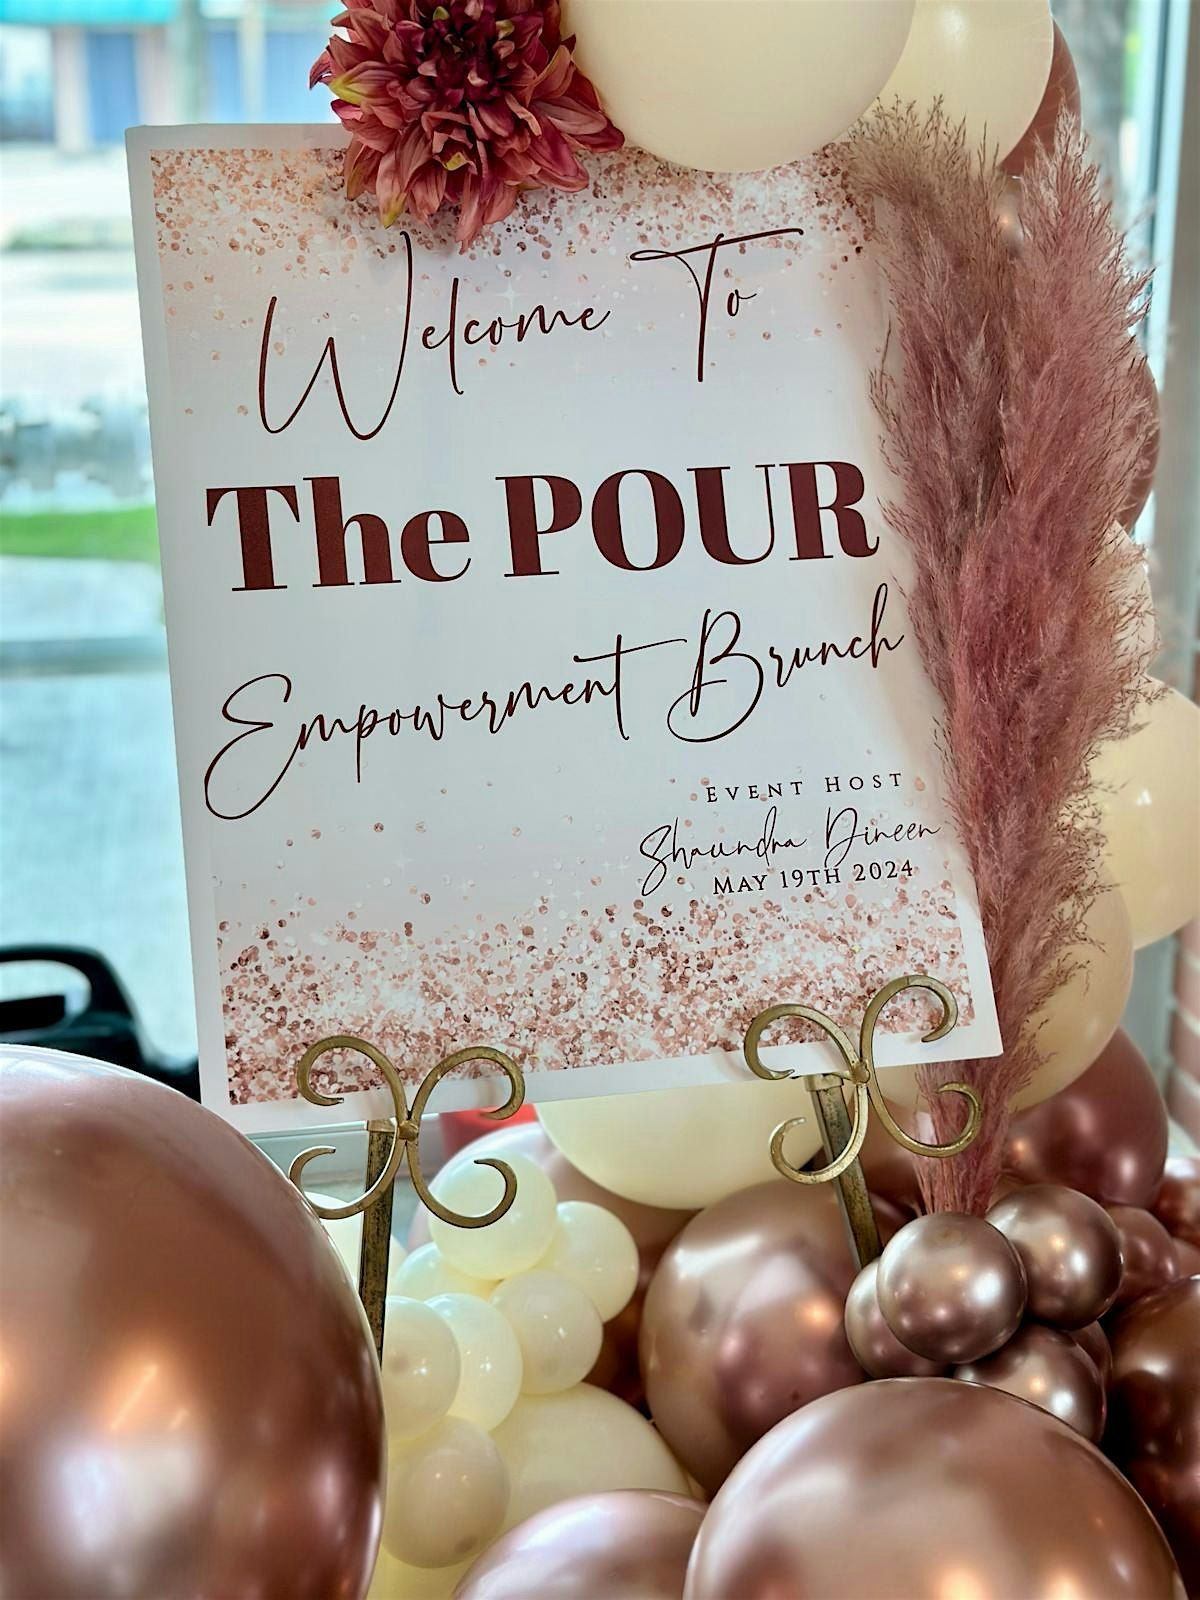 The POUR Empowerment Brunch II